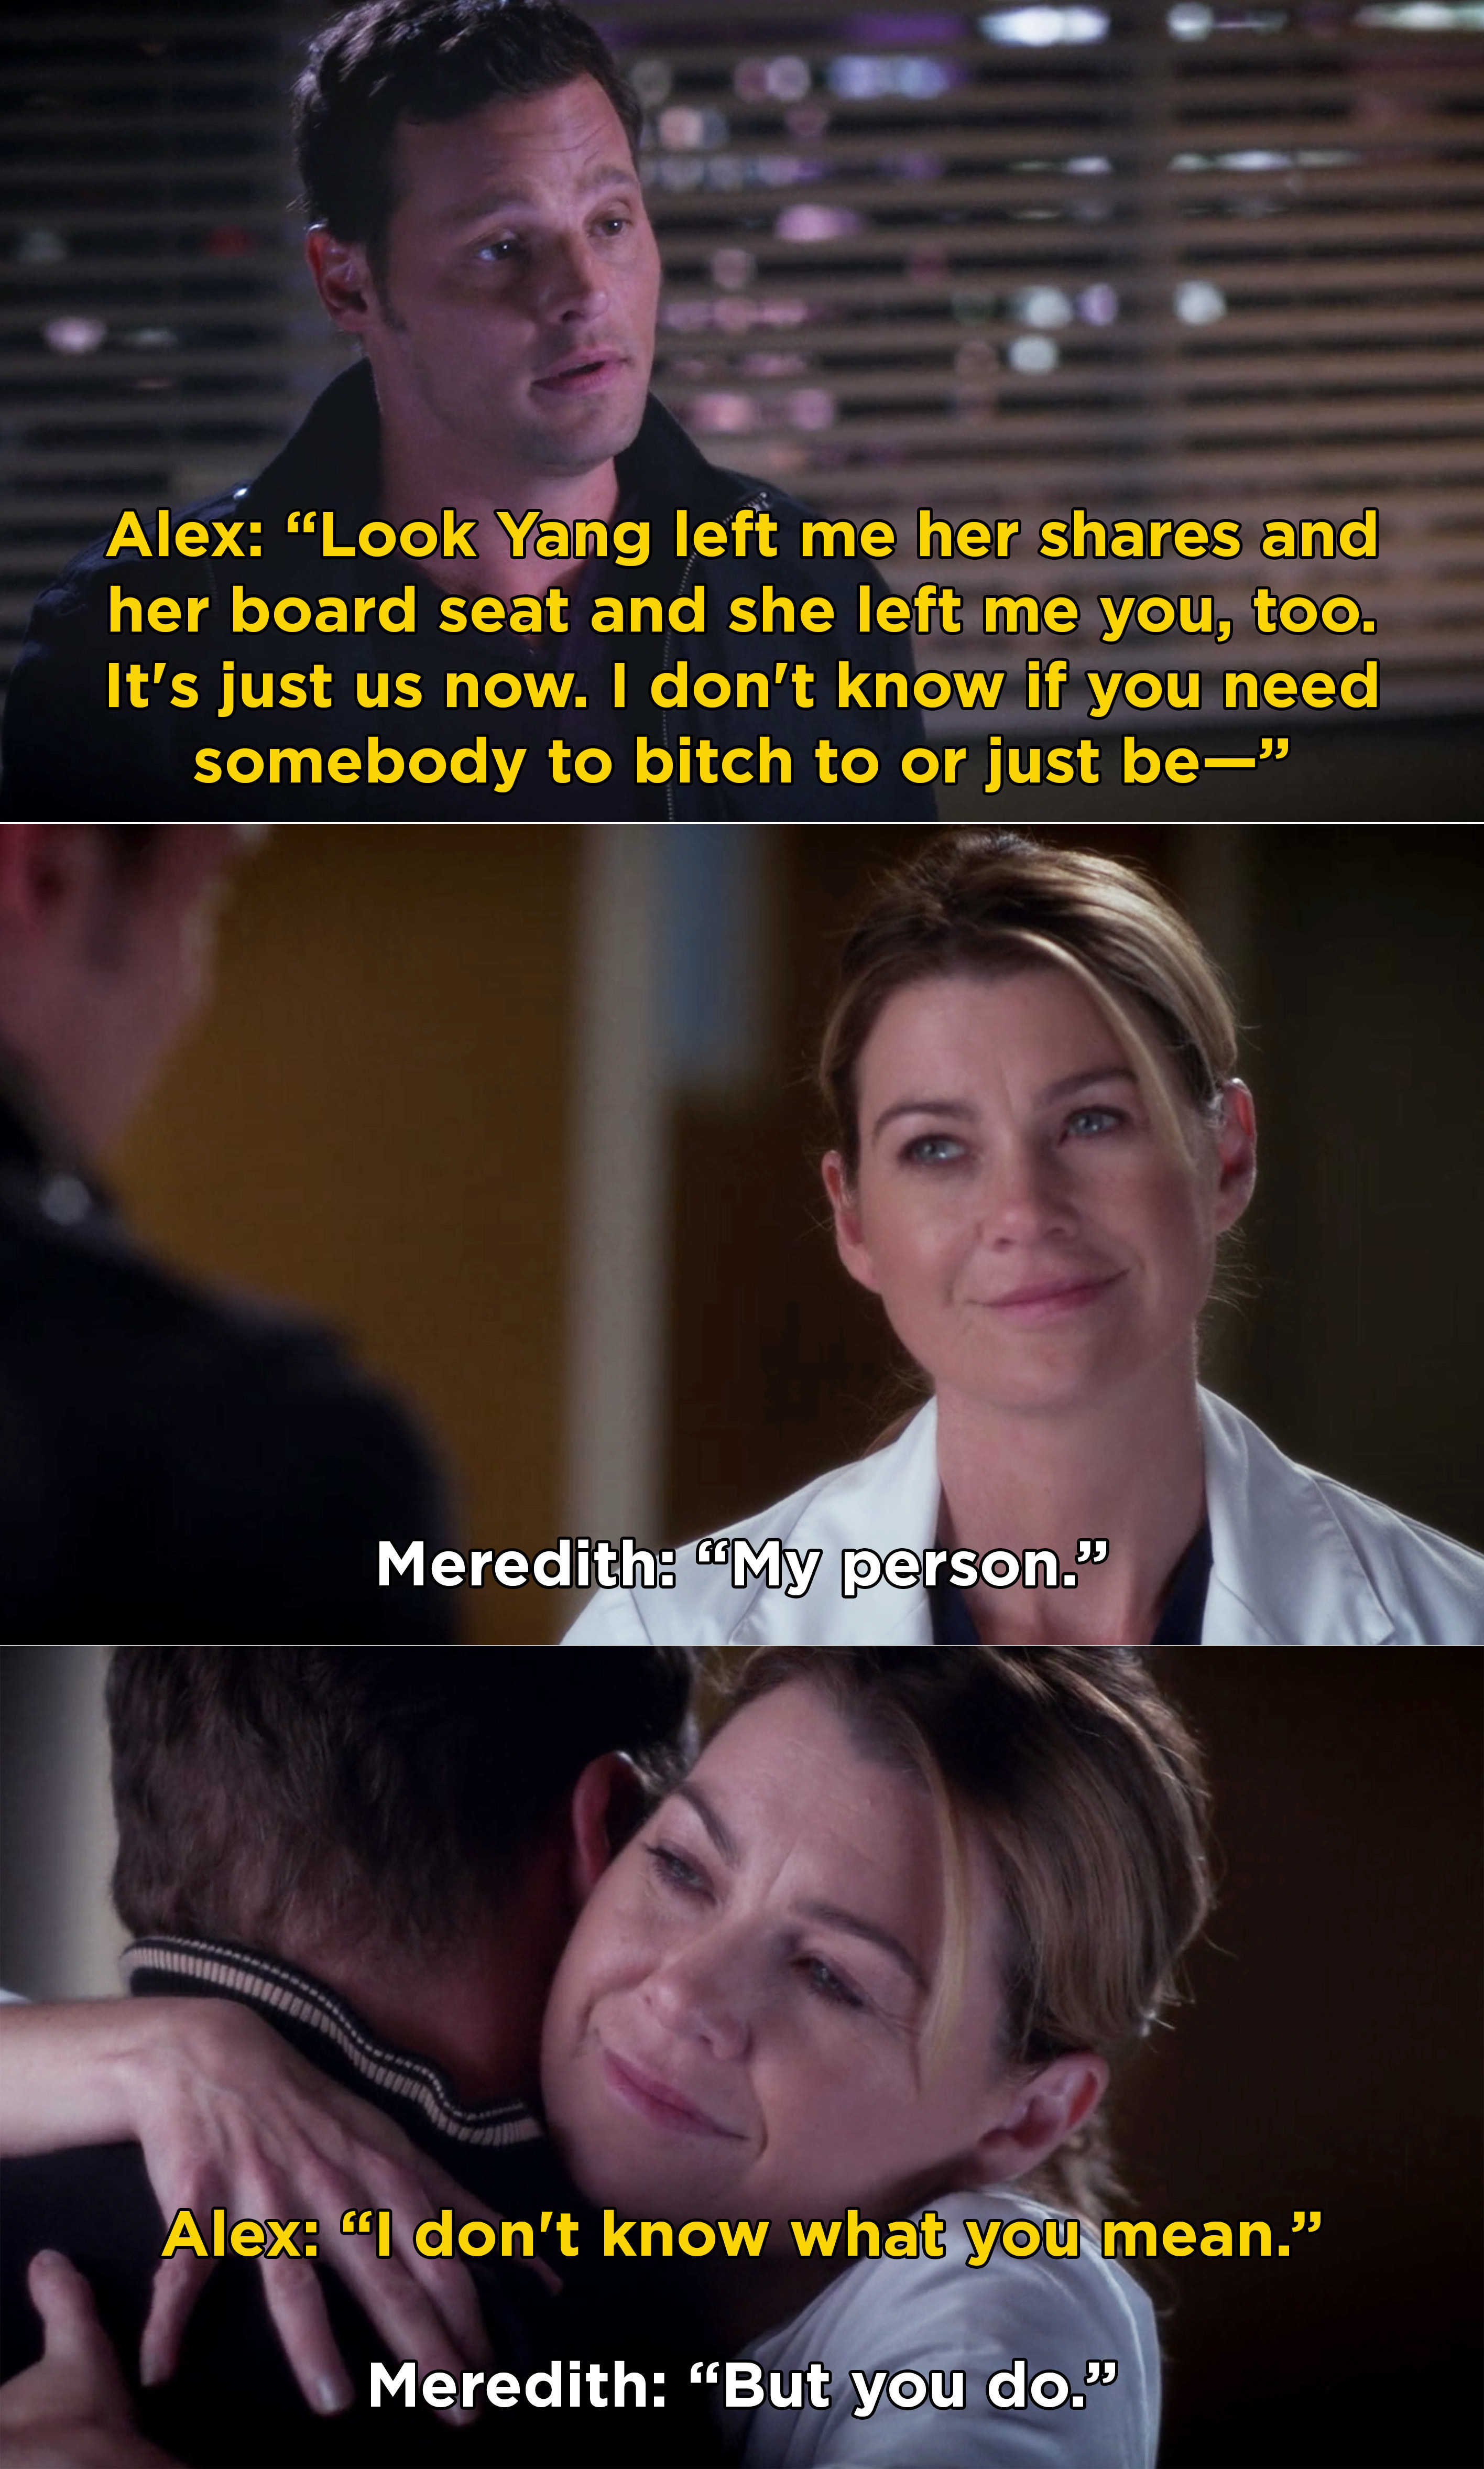 Alex: &quot;Yang left me her shares and board sheet and she left me you too, it&#x27;s just us now, and I don&#x27;t know if you need somebody to bitch at or just be-&quot; Meredith: &quot;My person,&quot; Alex: &quot;I don&#x27;t know what you mean,&quot; Meredith: &quot;But you do,&quot; they hug